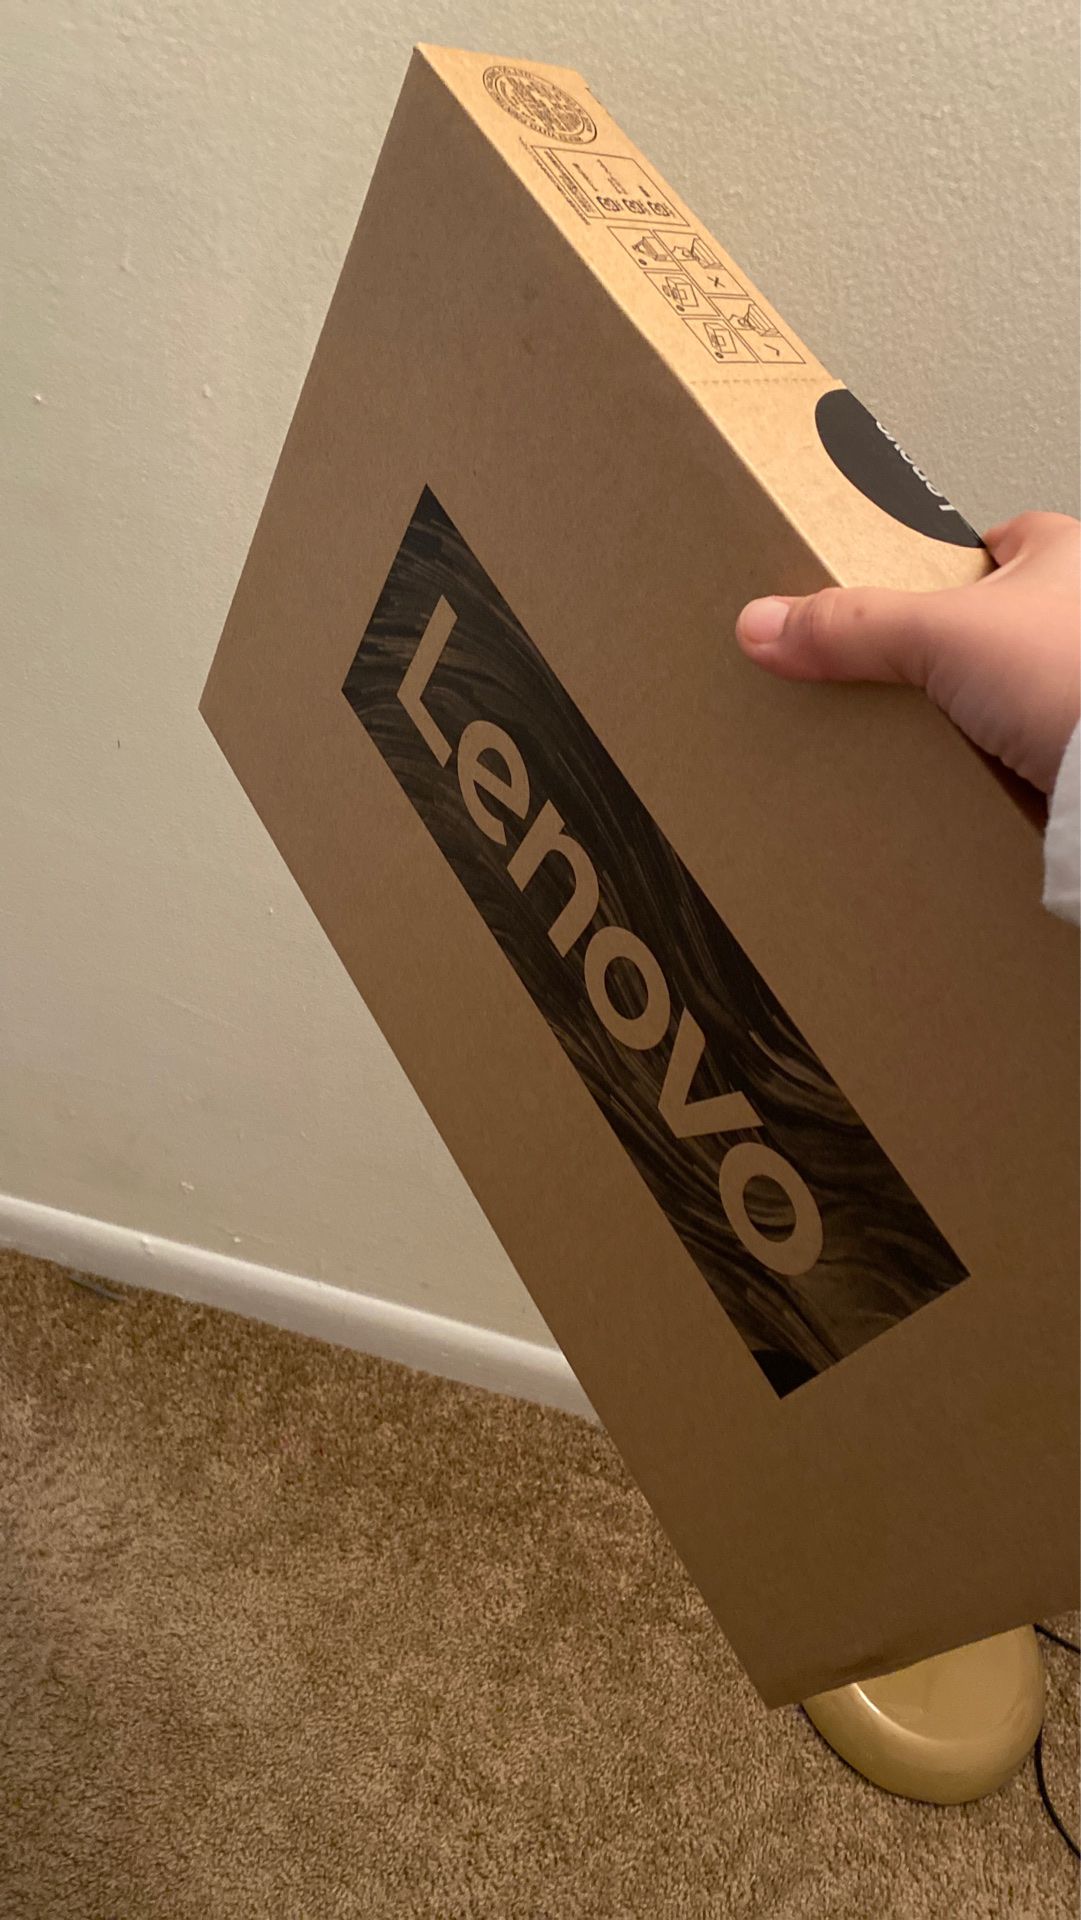 Laptop 100% New Never used Sealed in box. Lenovo Ideapad 3.. $399 in store I’m asking $280